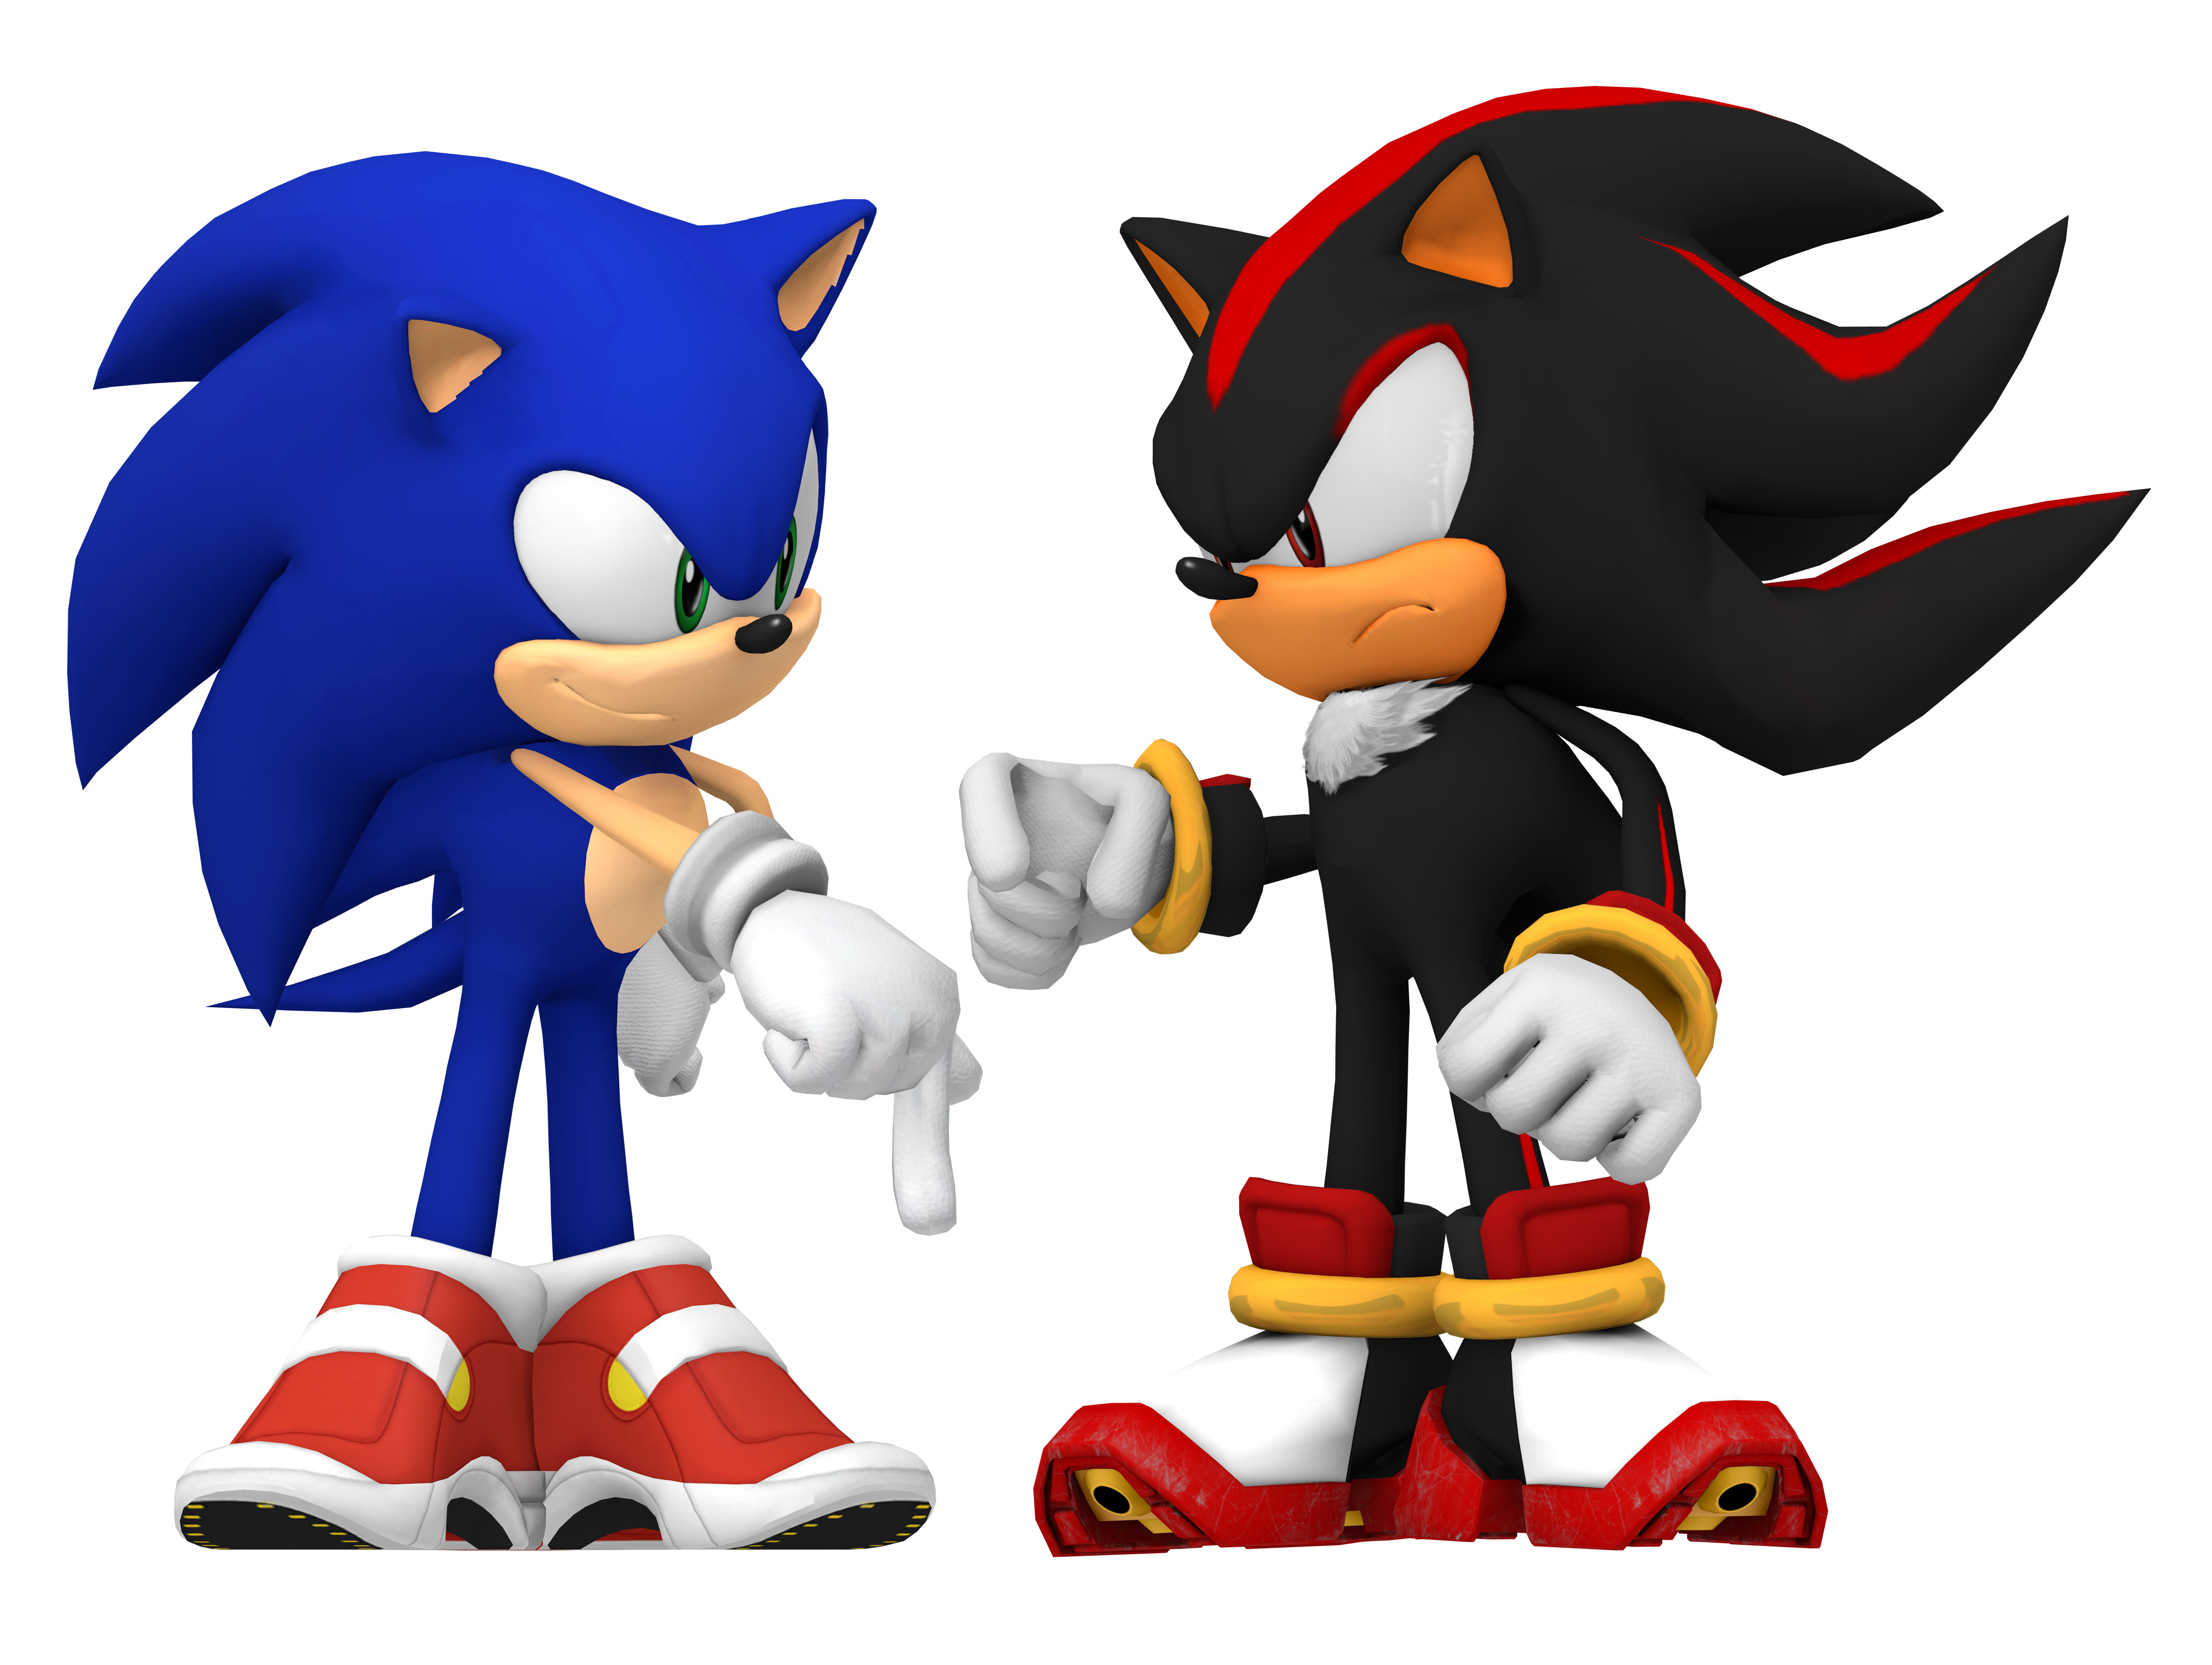 Dreamcast - Sonic Adventure 2 - Shadow - The Models Resource